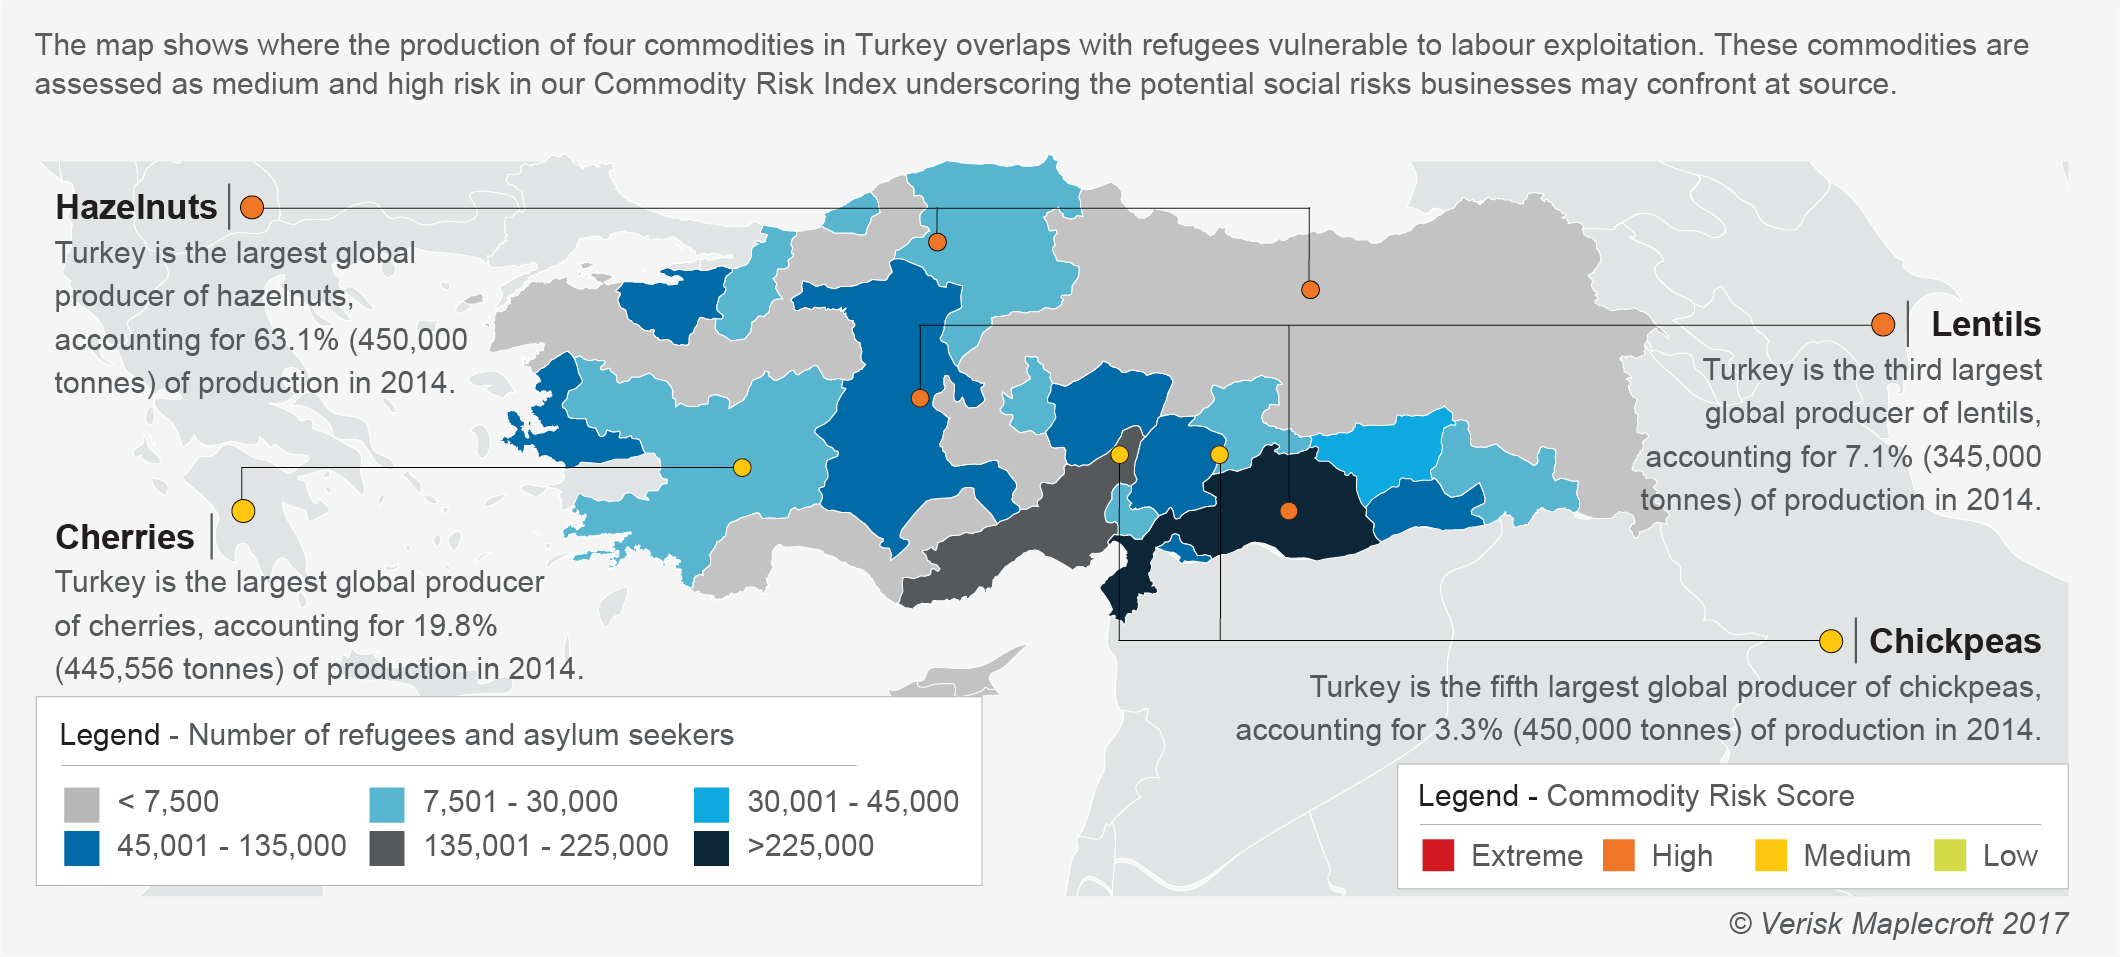 Turkey’s refugee population and commodity production risks_HRO 2017 mandatory supply chain reporting